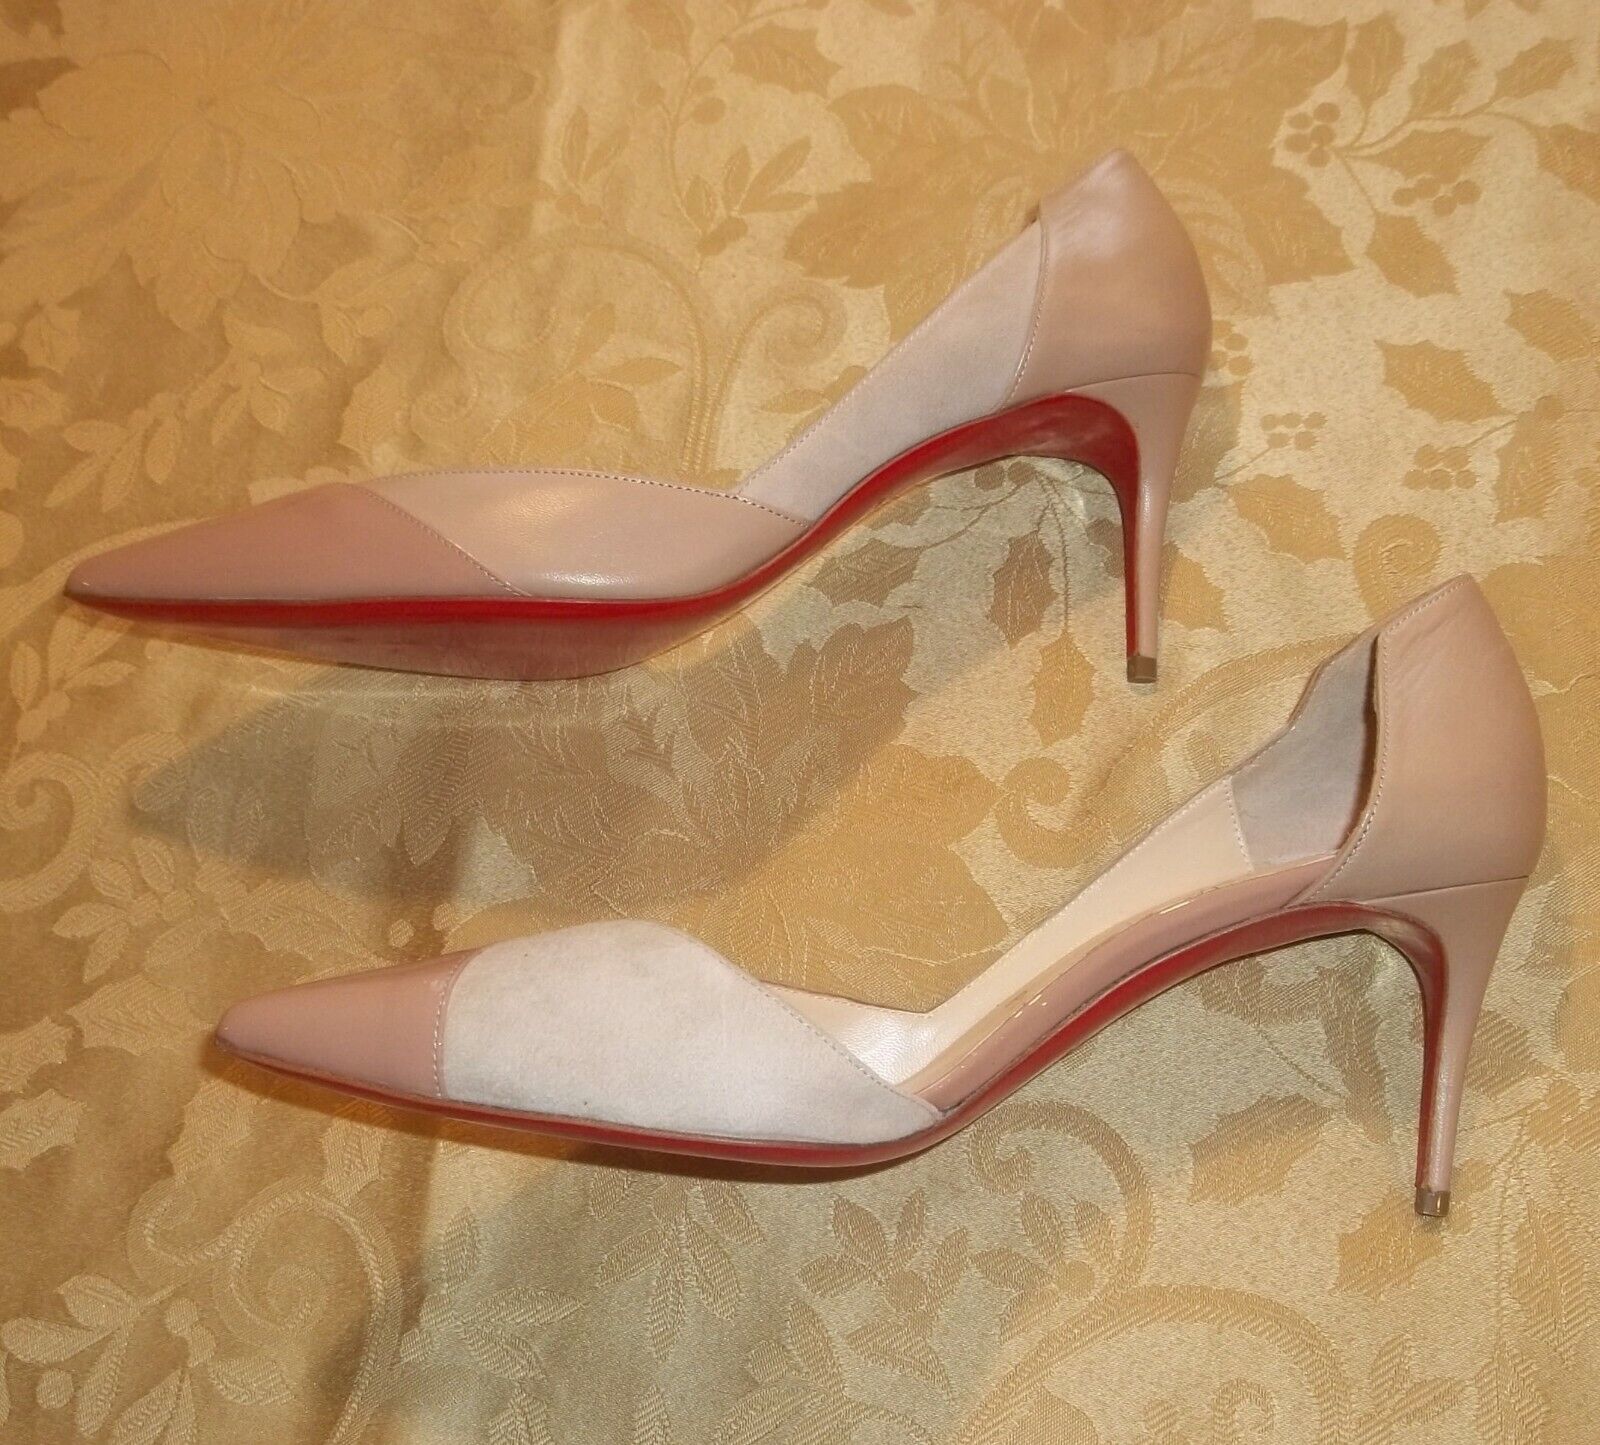 Christian Louboutin Nude Red Bottom Shoes for Women Size US 6 EUR 